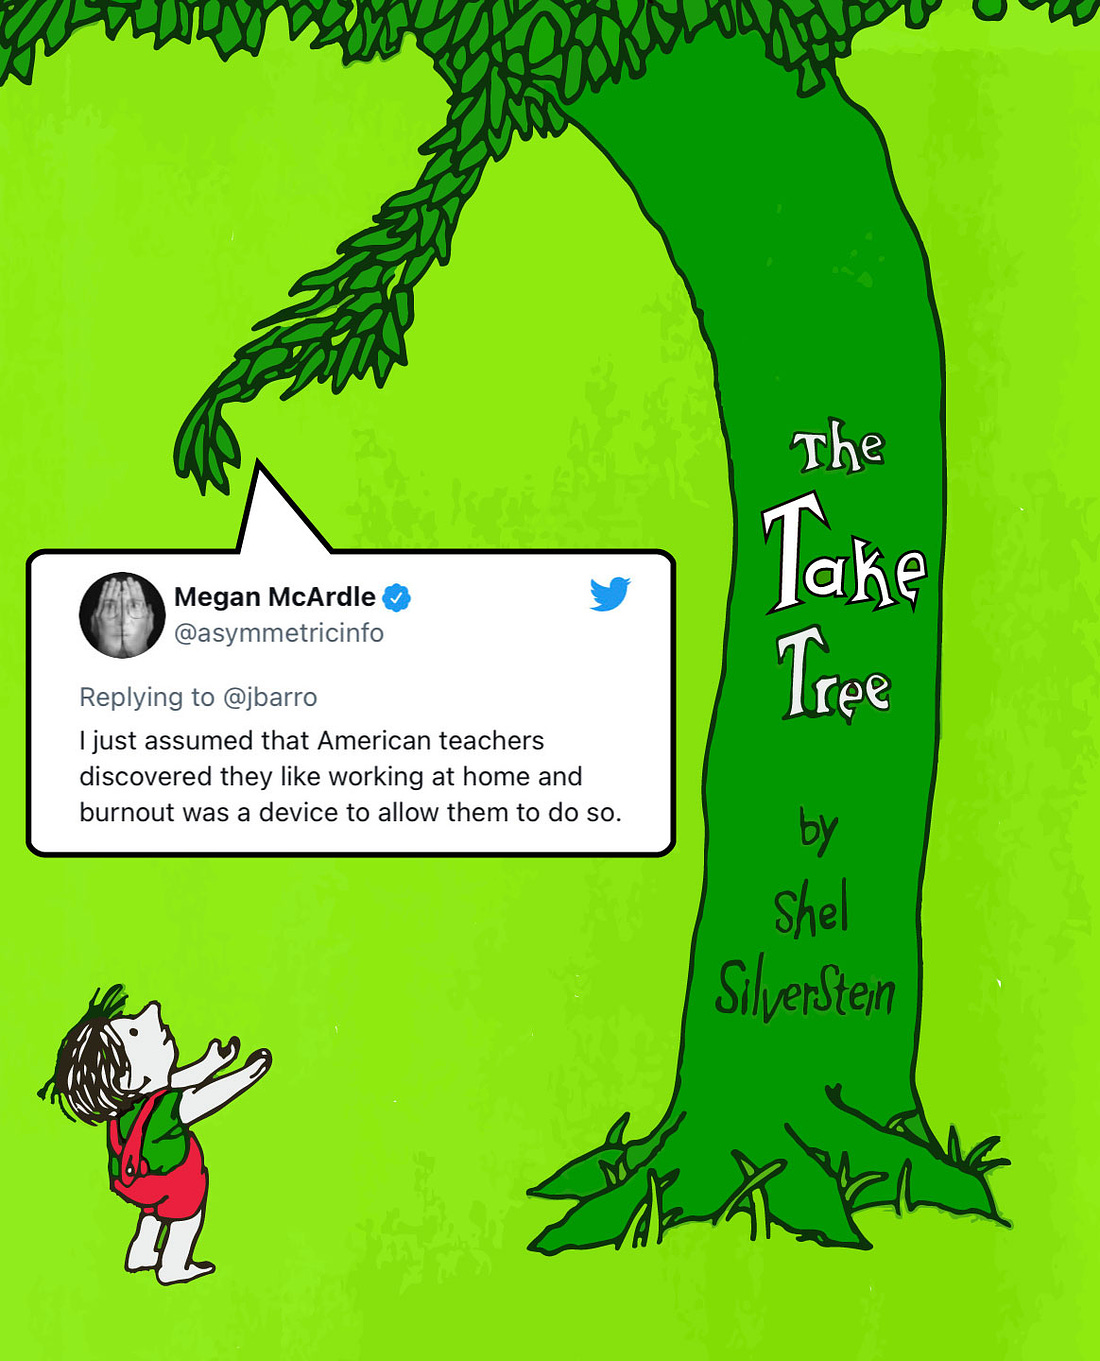 Cover of Shel Silverstein’s “The Giving Tree” except it’s the Take Tree instead, and it’s handing the poor innocent child a tweet by Megan McArdle that reads “Replying to @jbarro, I just assumed that American teachers discovered they like working at home and burnout was a device to allow them to do so.”